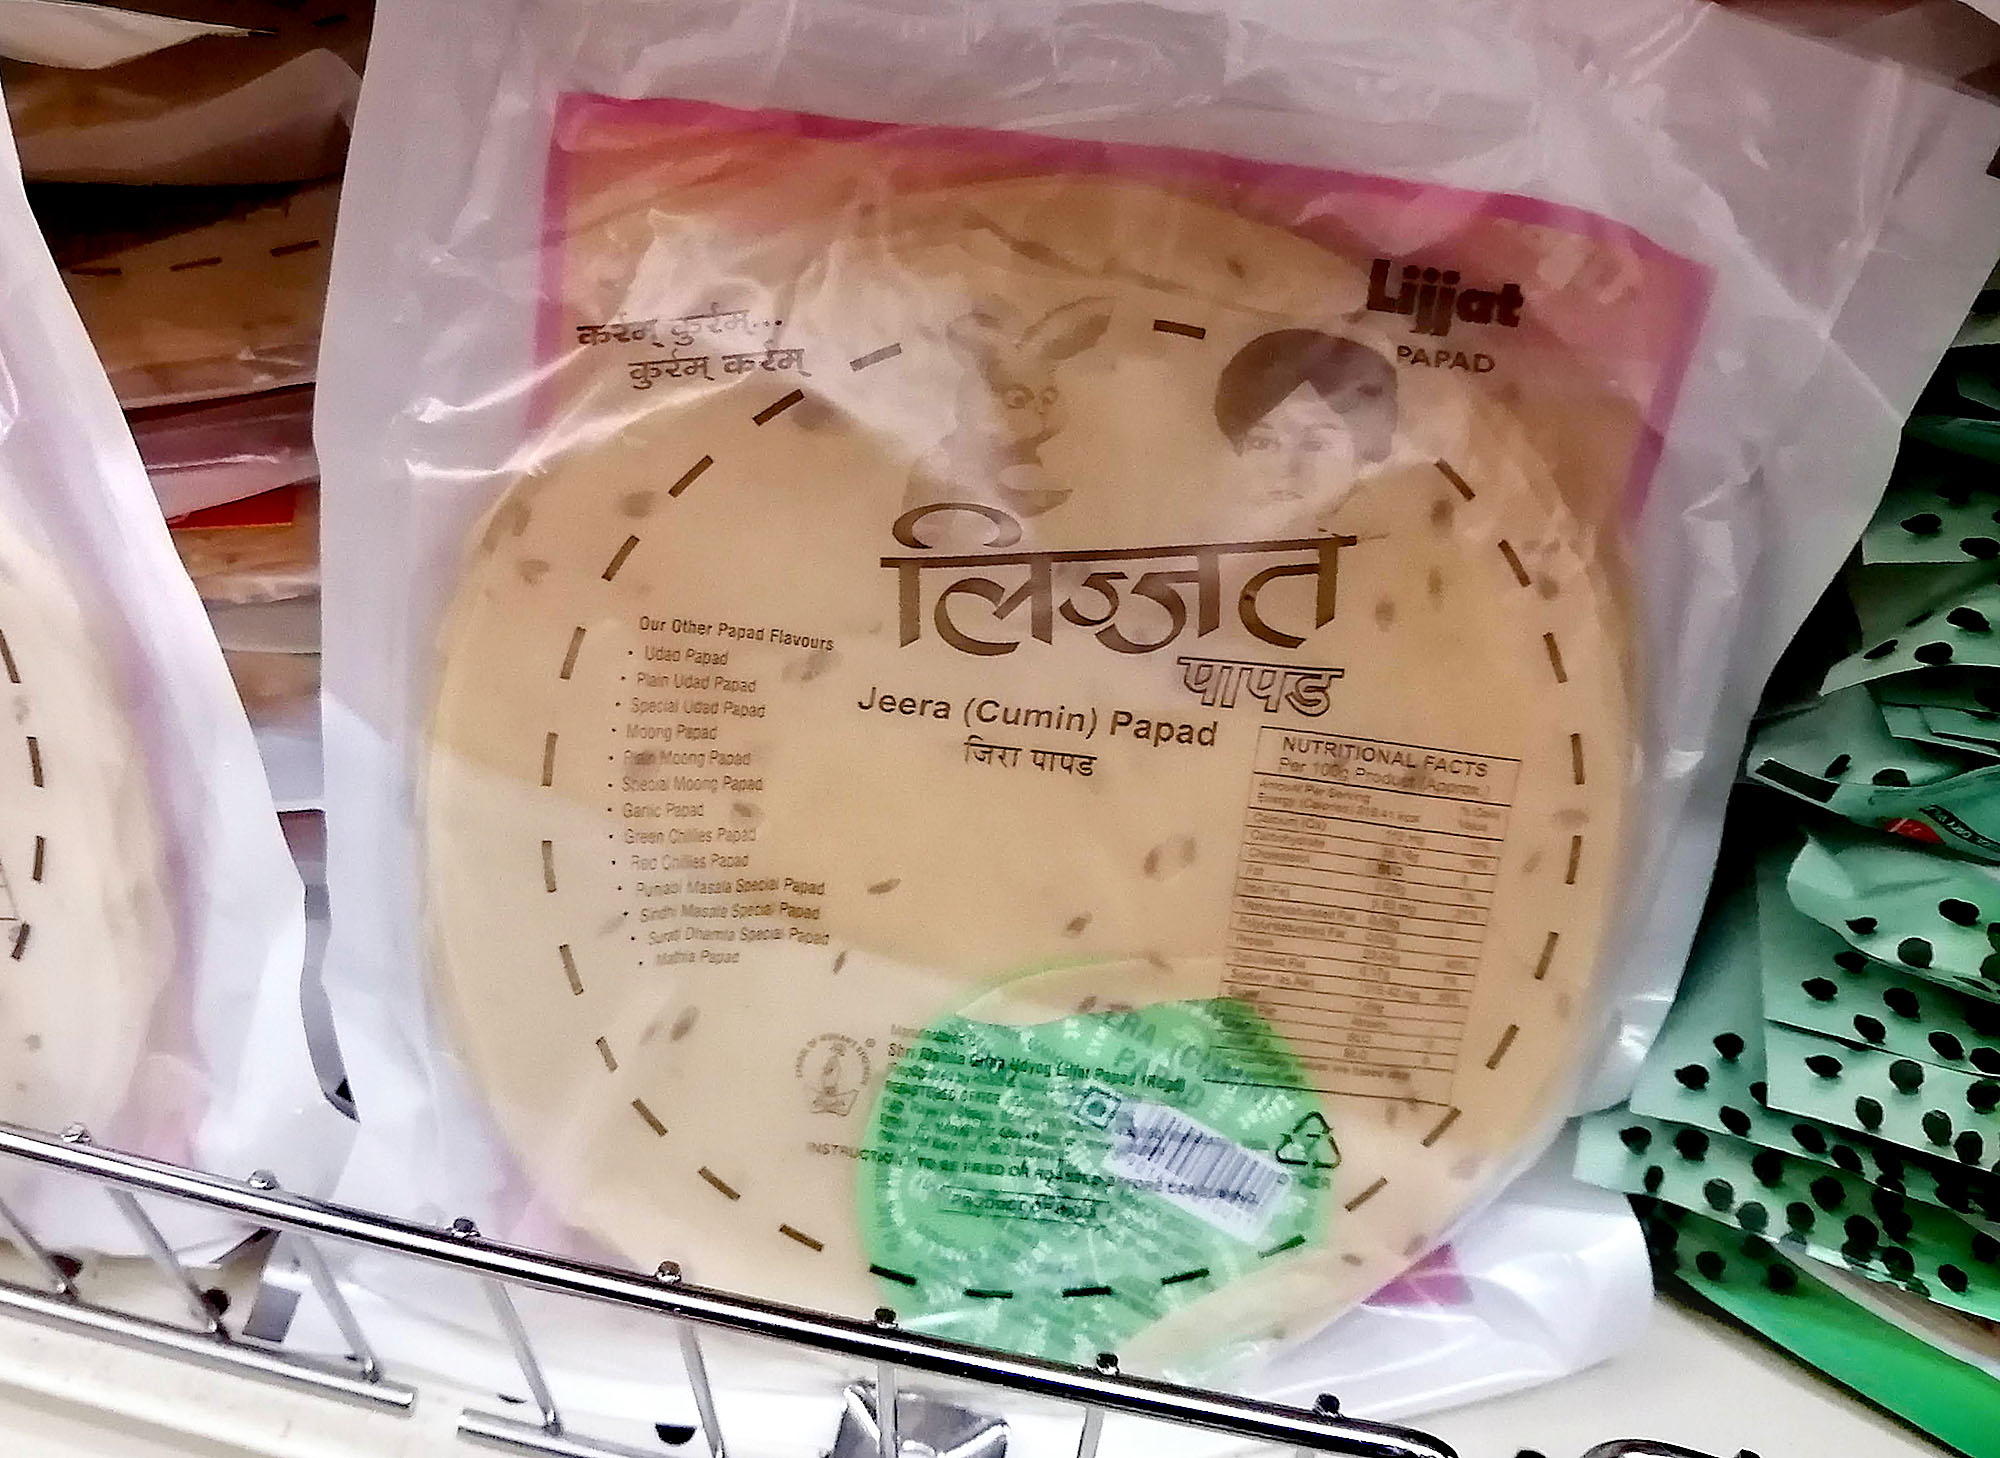 A package of uncooked round crackers labeled â€œJeera (Cumin) Papadâ€ on a shelf with other products. Photo by Paul Young.